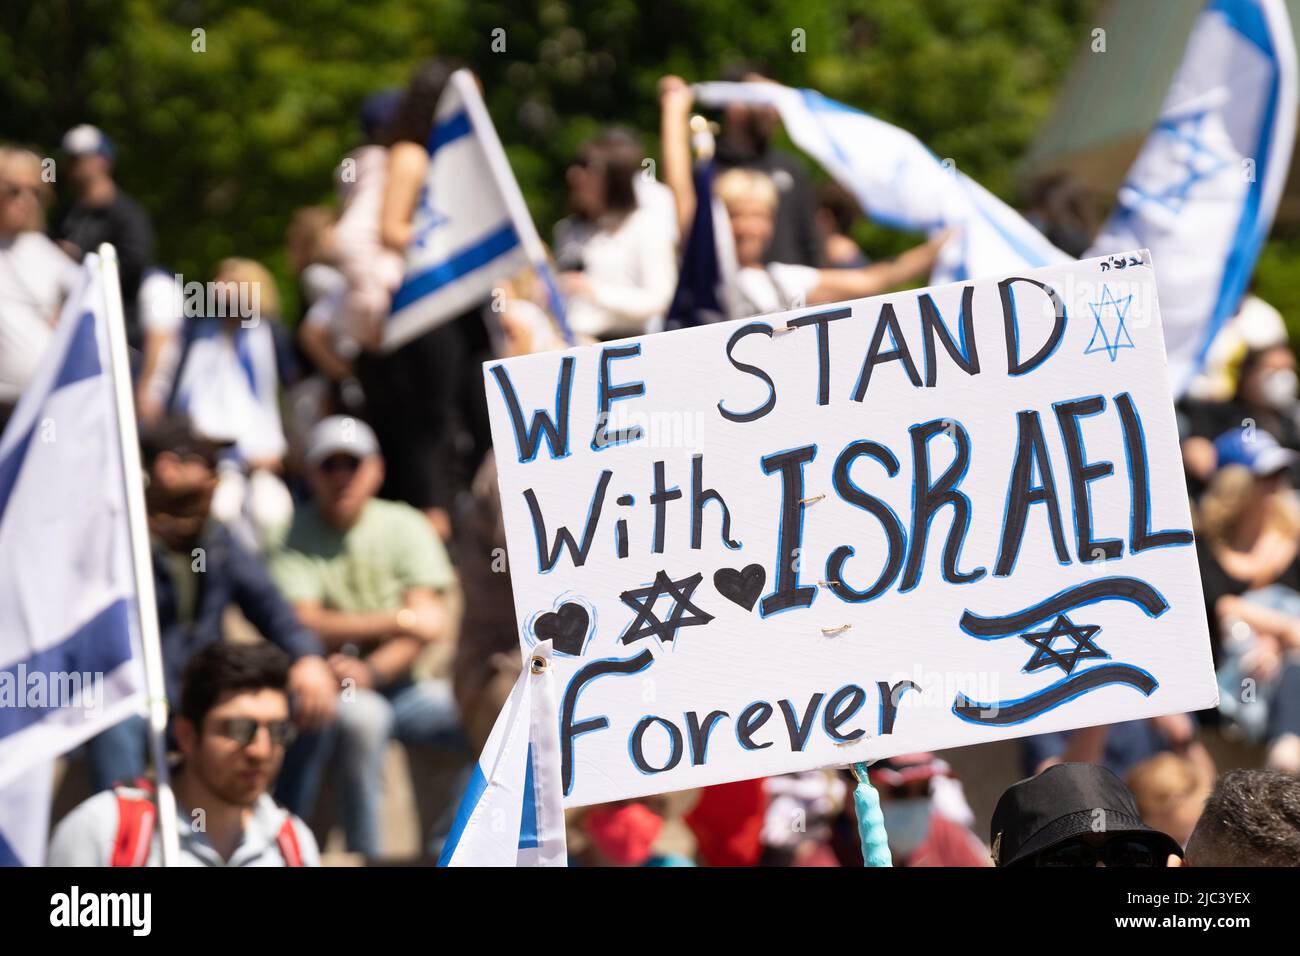 People show solidarity with Israel in Toronto, Ontario, during a rally at Mel Lastman Square. Stock Photo